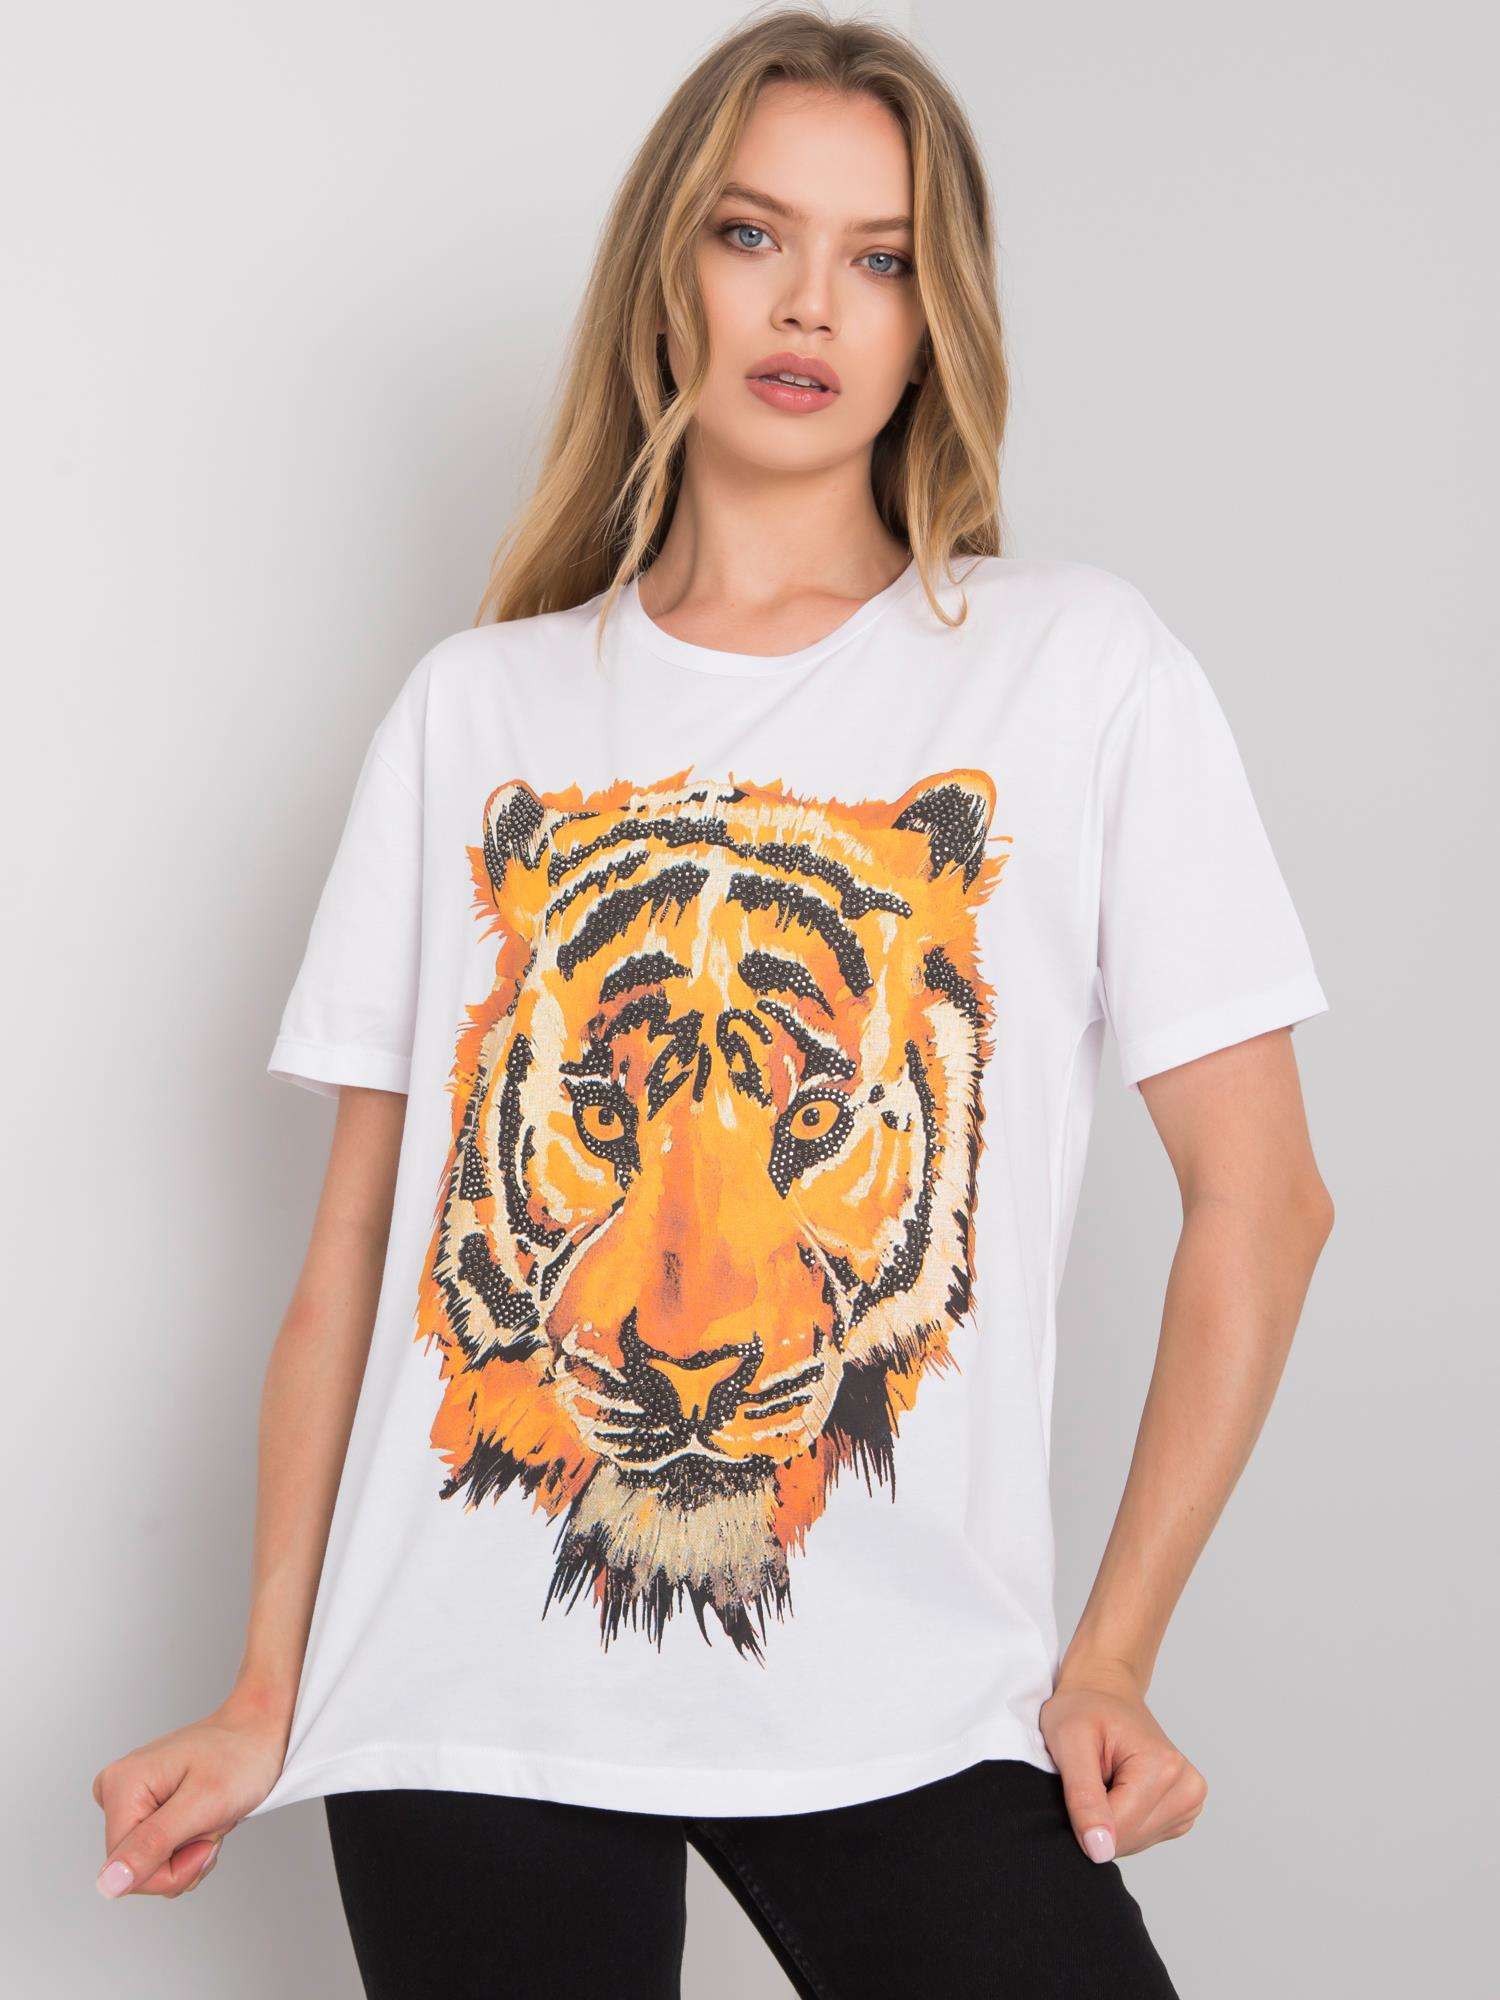 White T-shirt with print